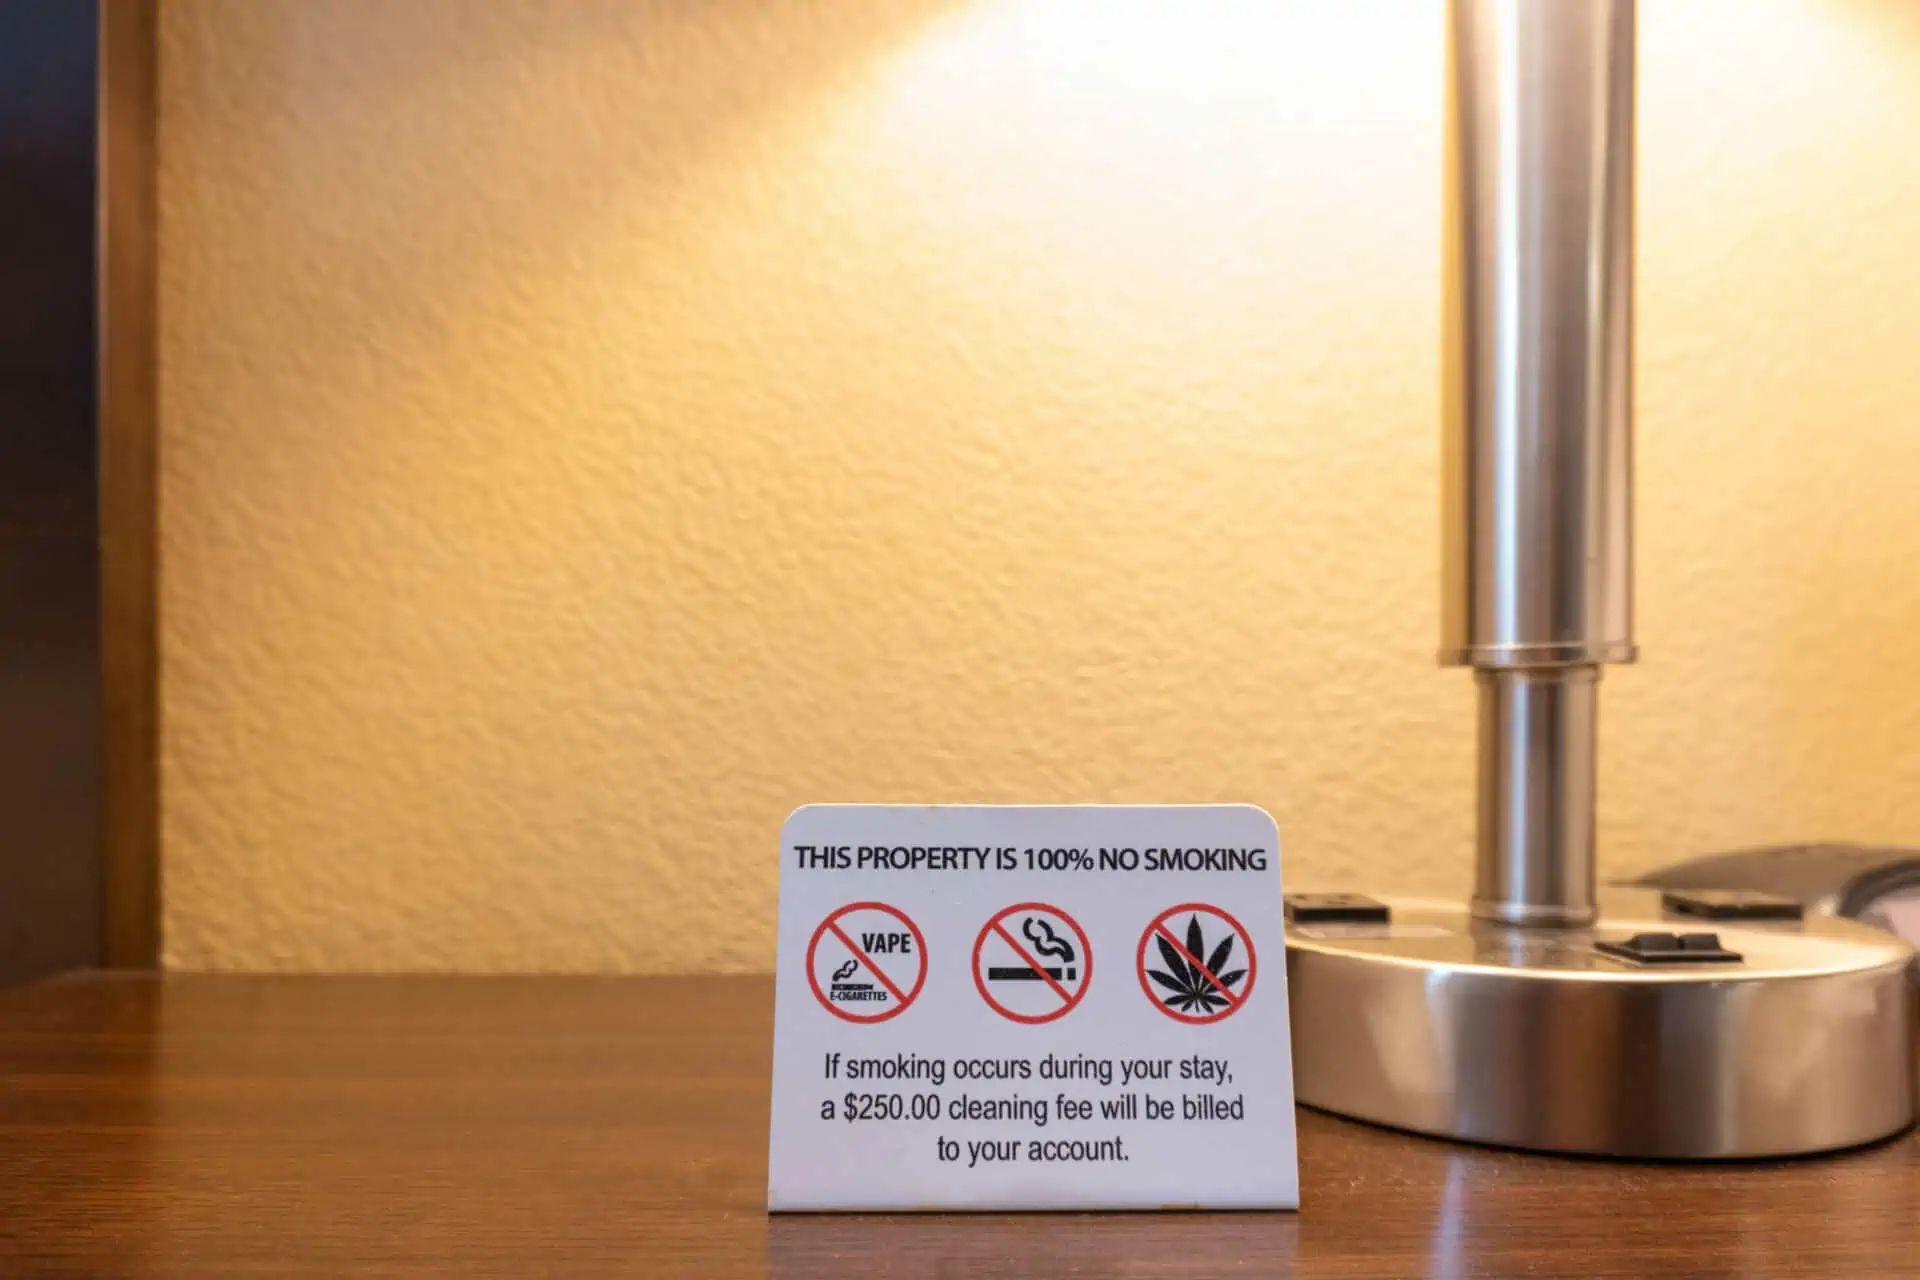 Wondering How to Travel with Medical Marijuana? Your Questions Answered

Hotel